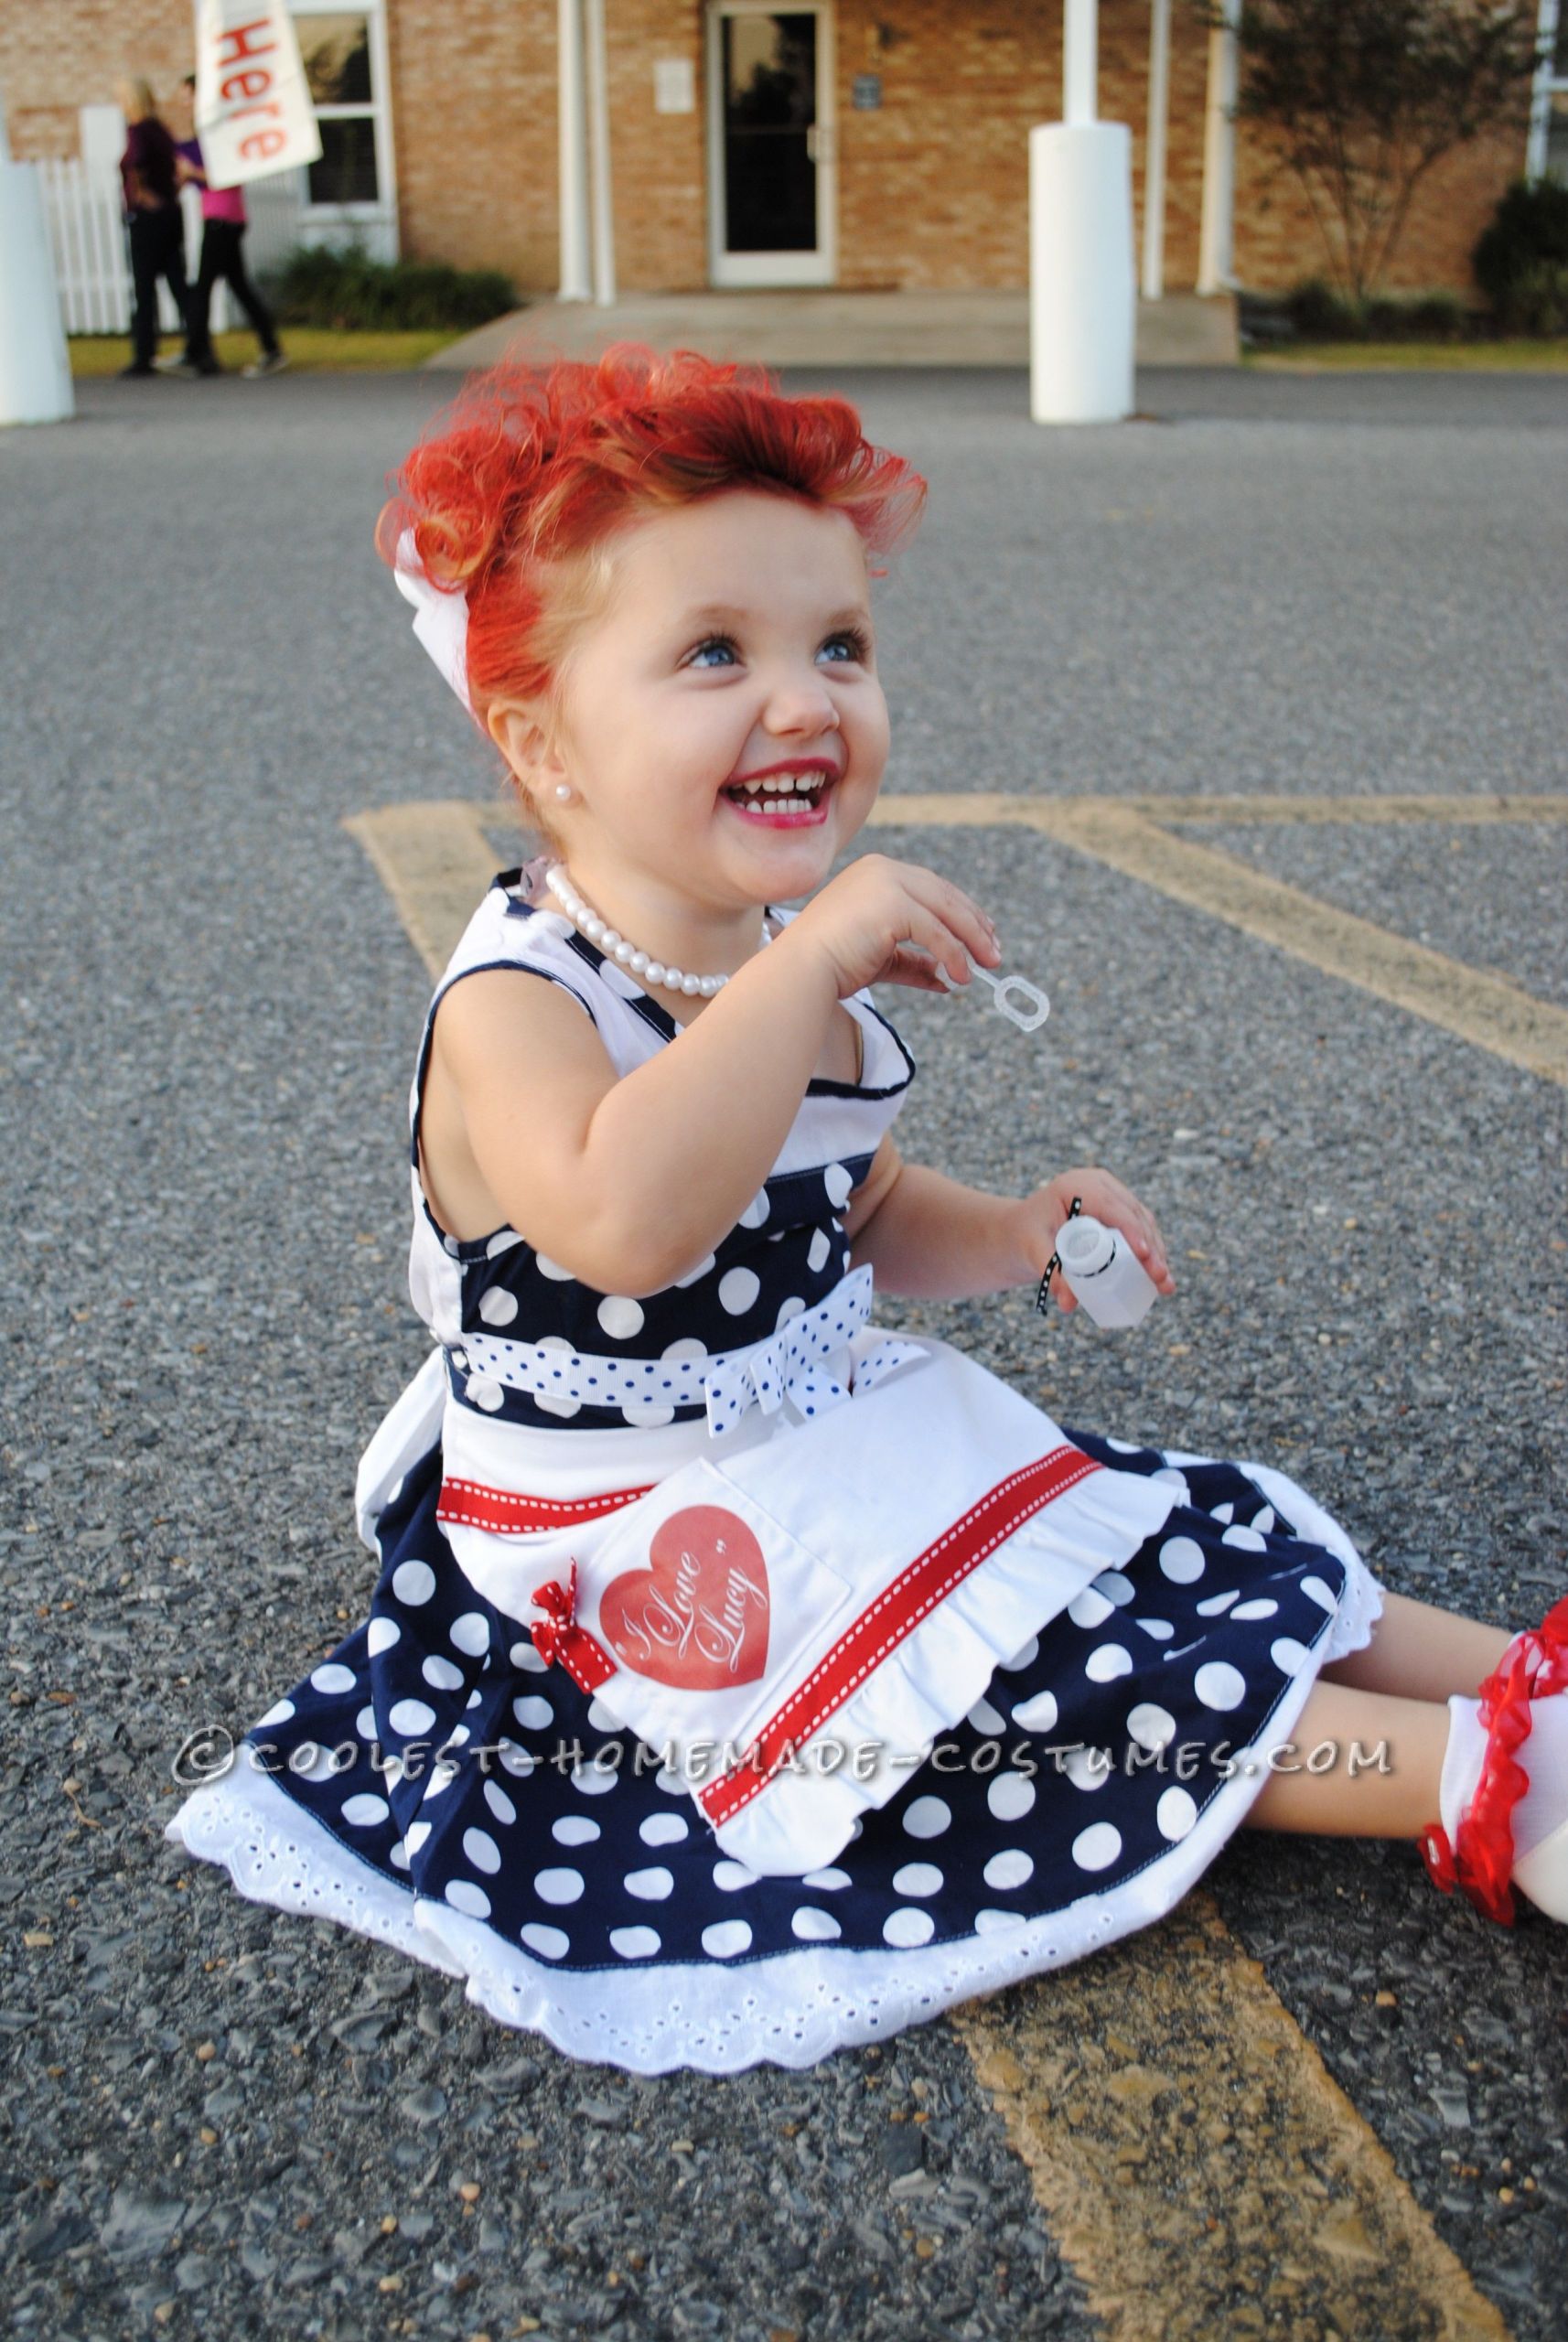 DIY Kids Costume
 Adorable “I Love Lucy” Homemade Costume for a Toddler